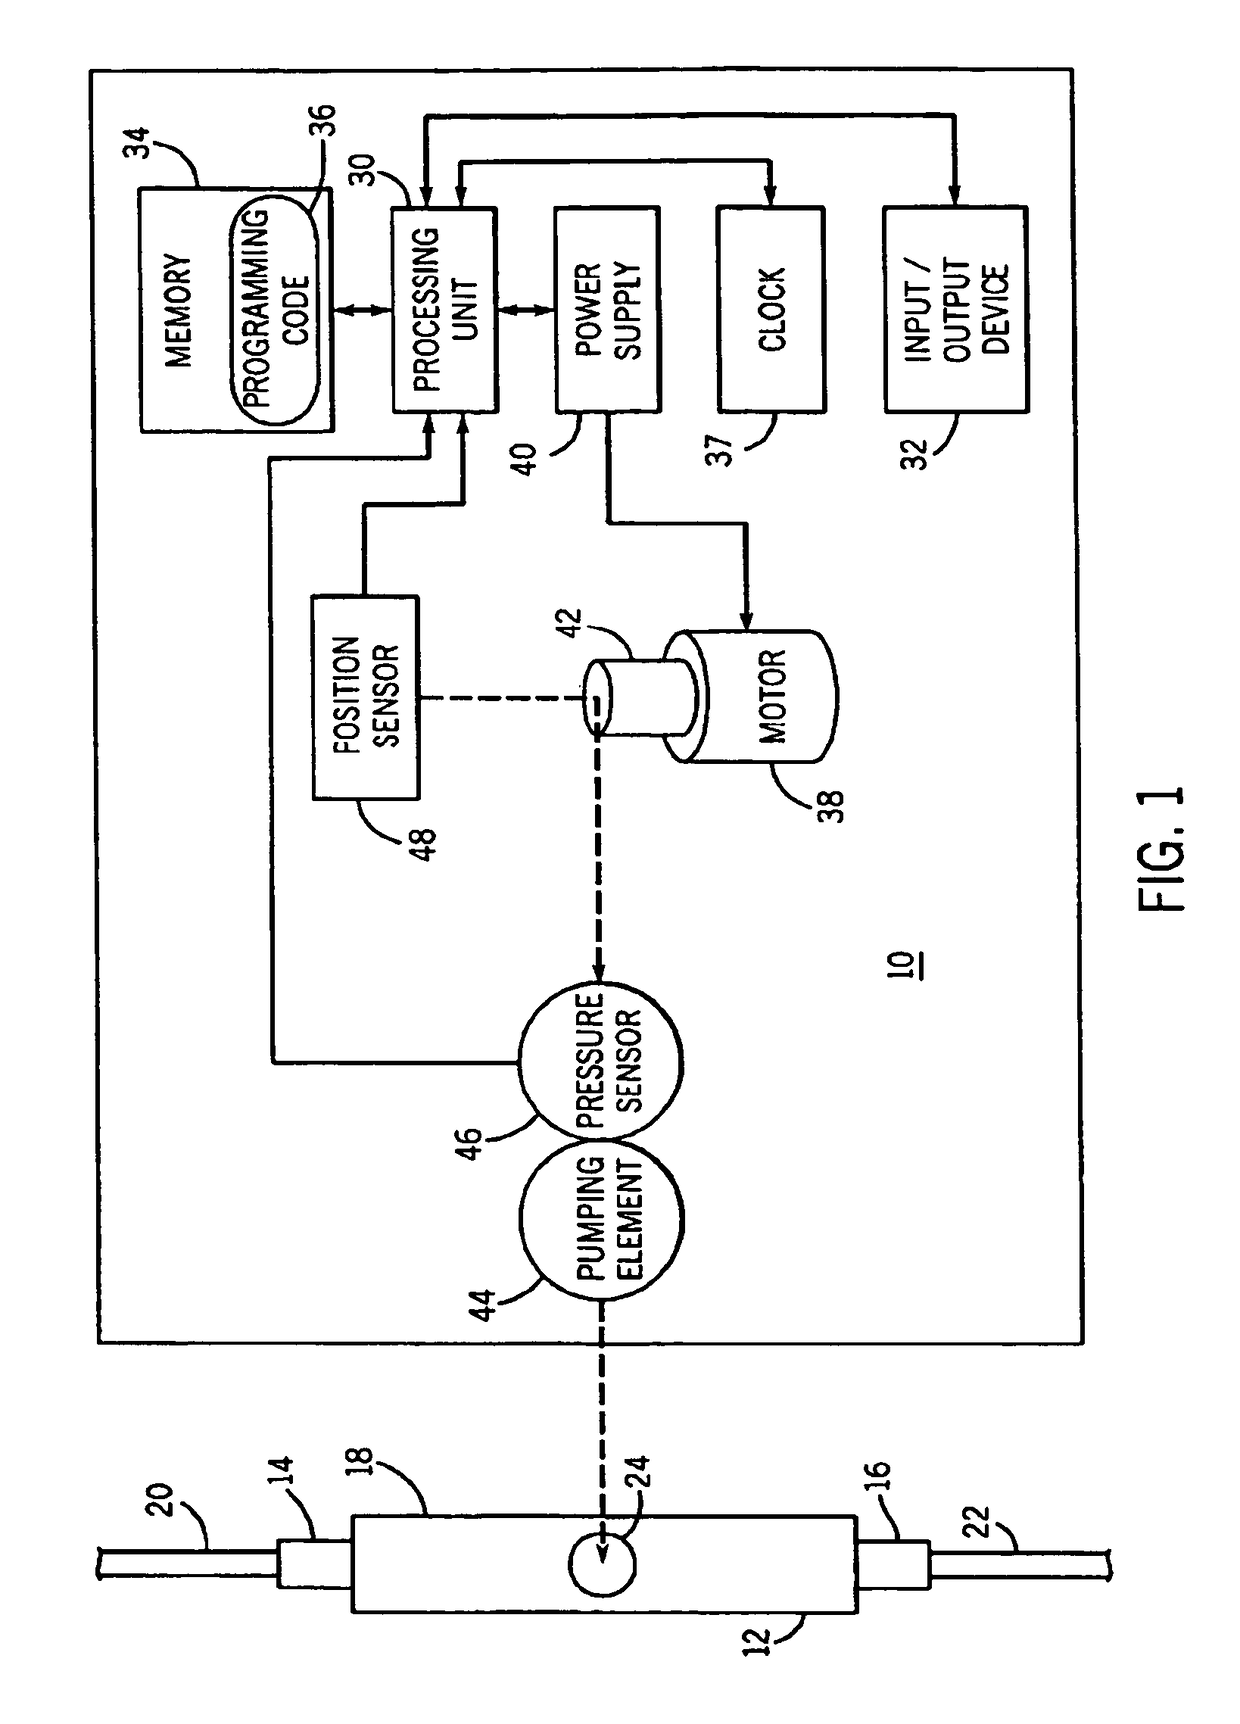 System and method for improved low flow medical pump delivery